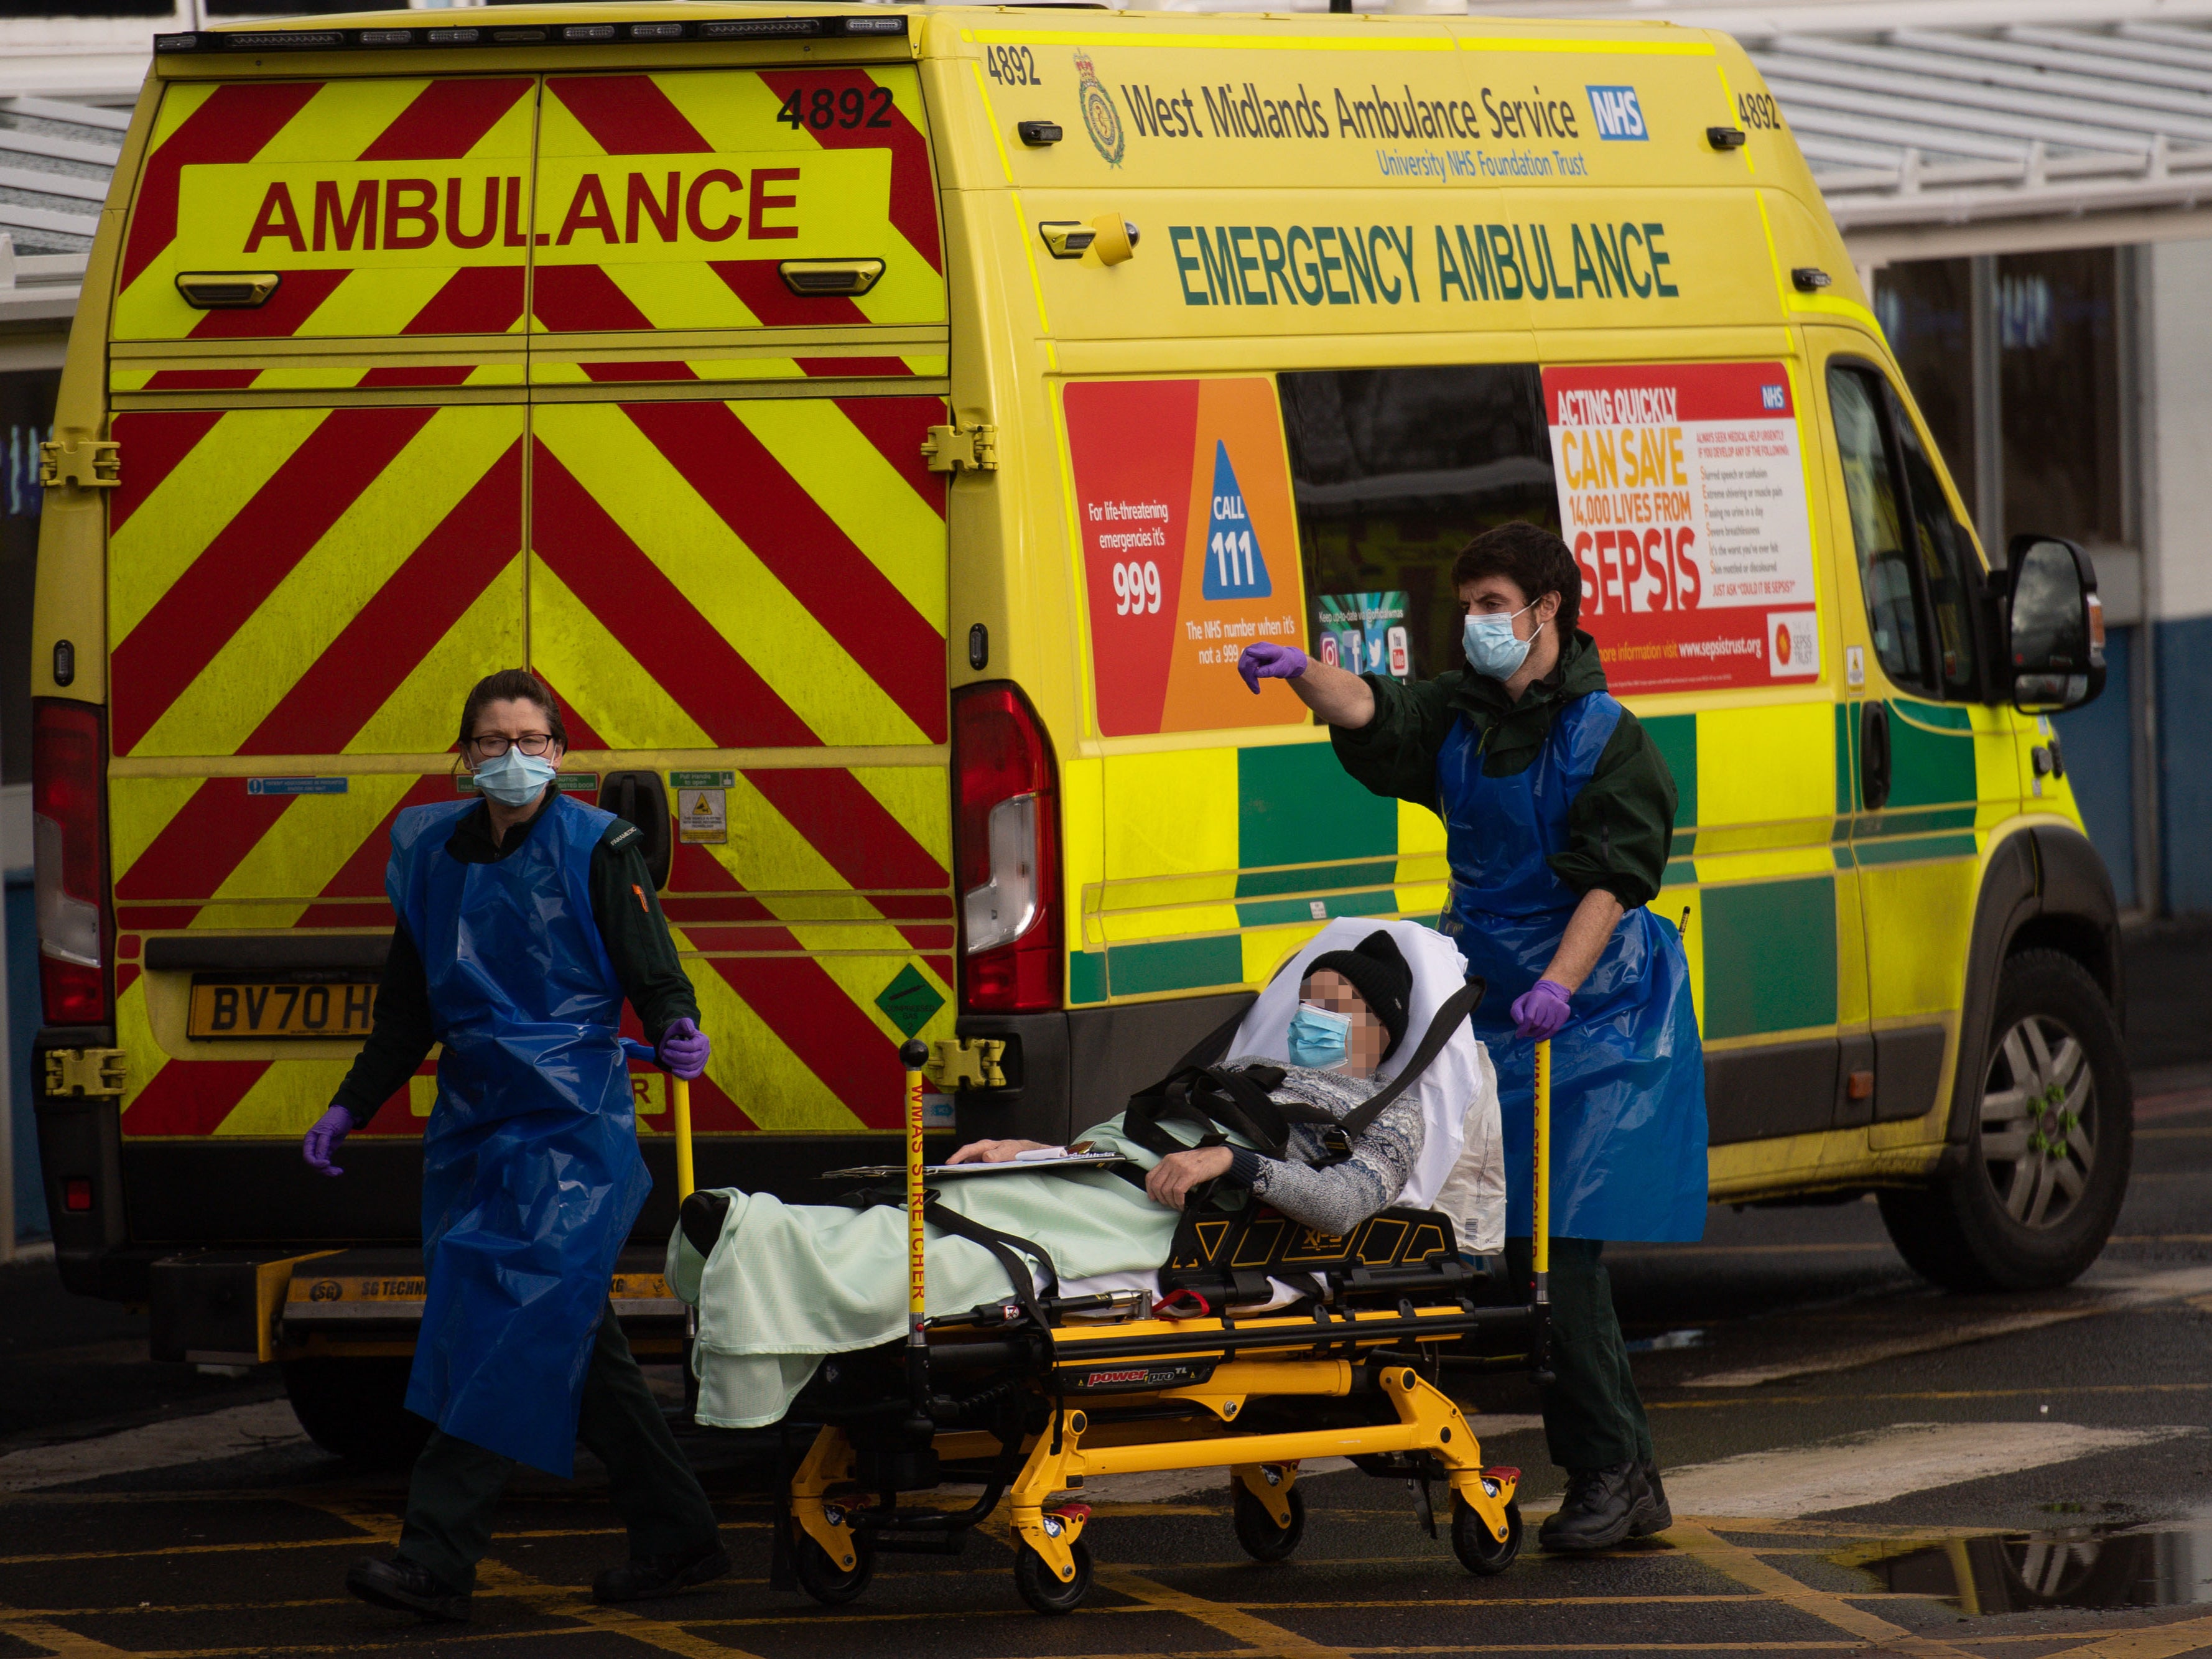 Nine out of 10 ambulance trusts in England are under extreme pressure